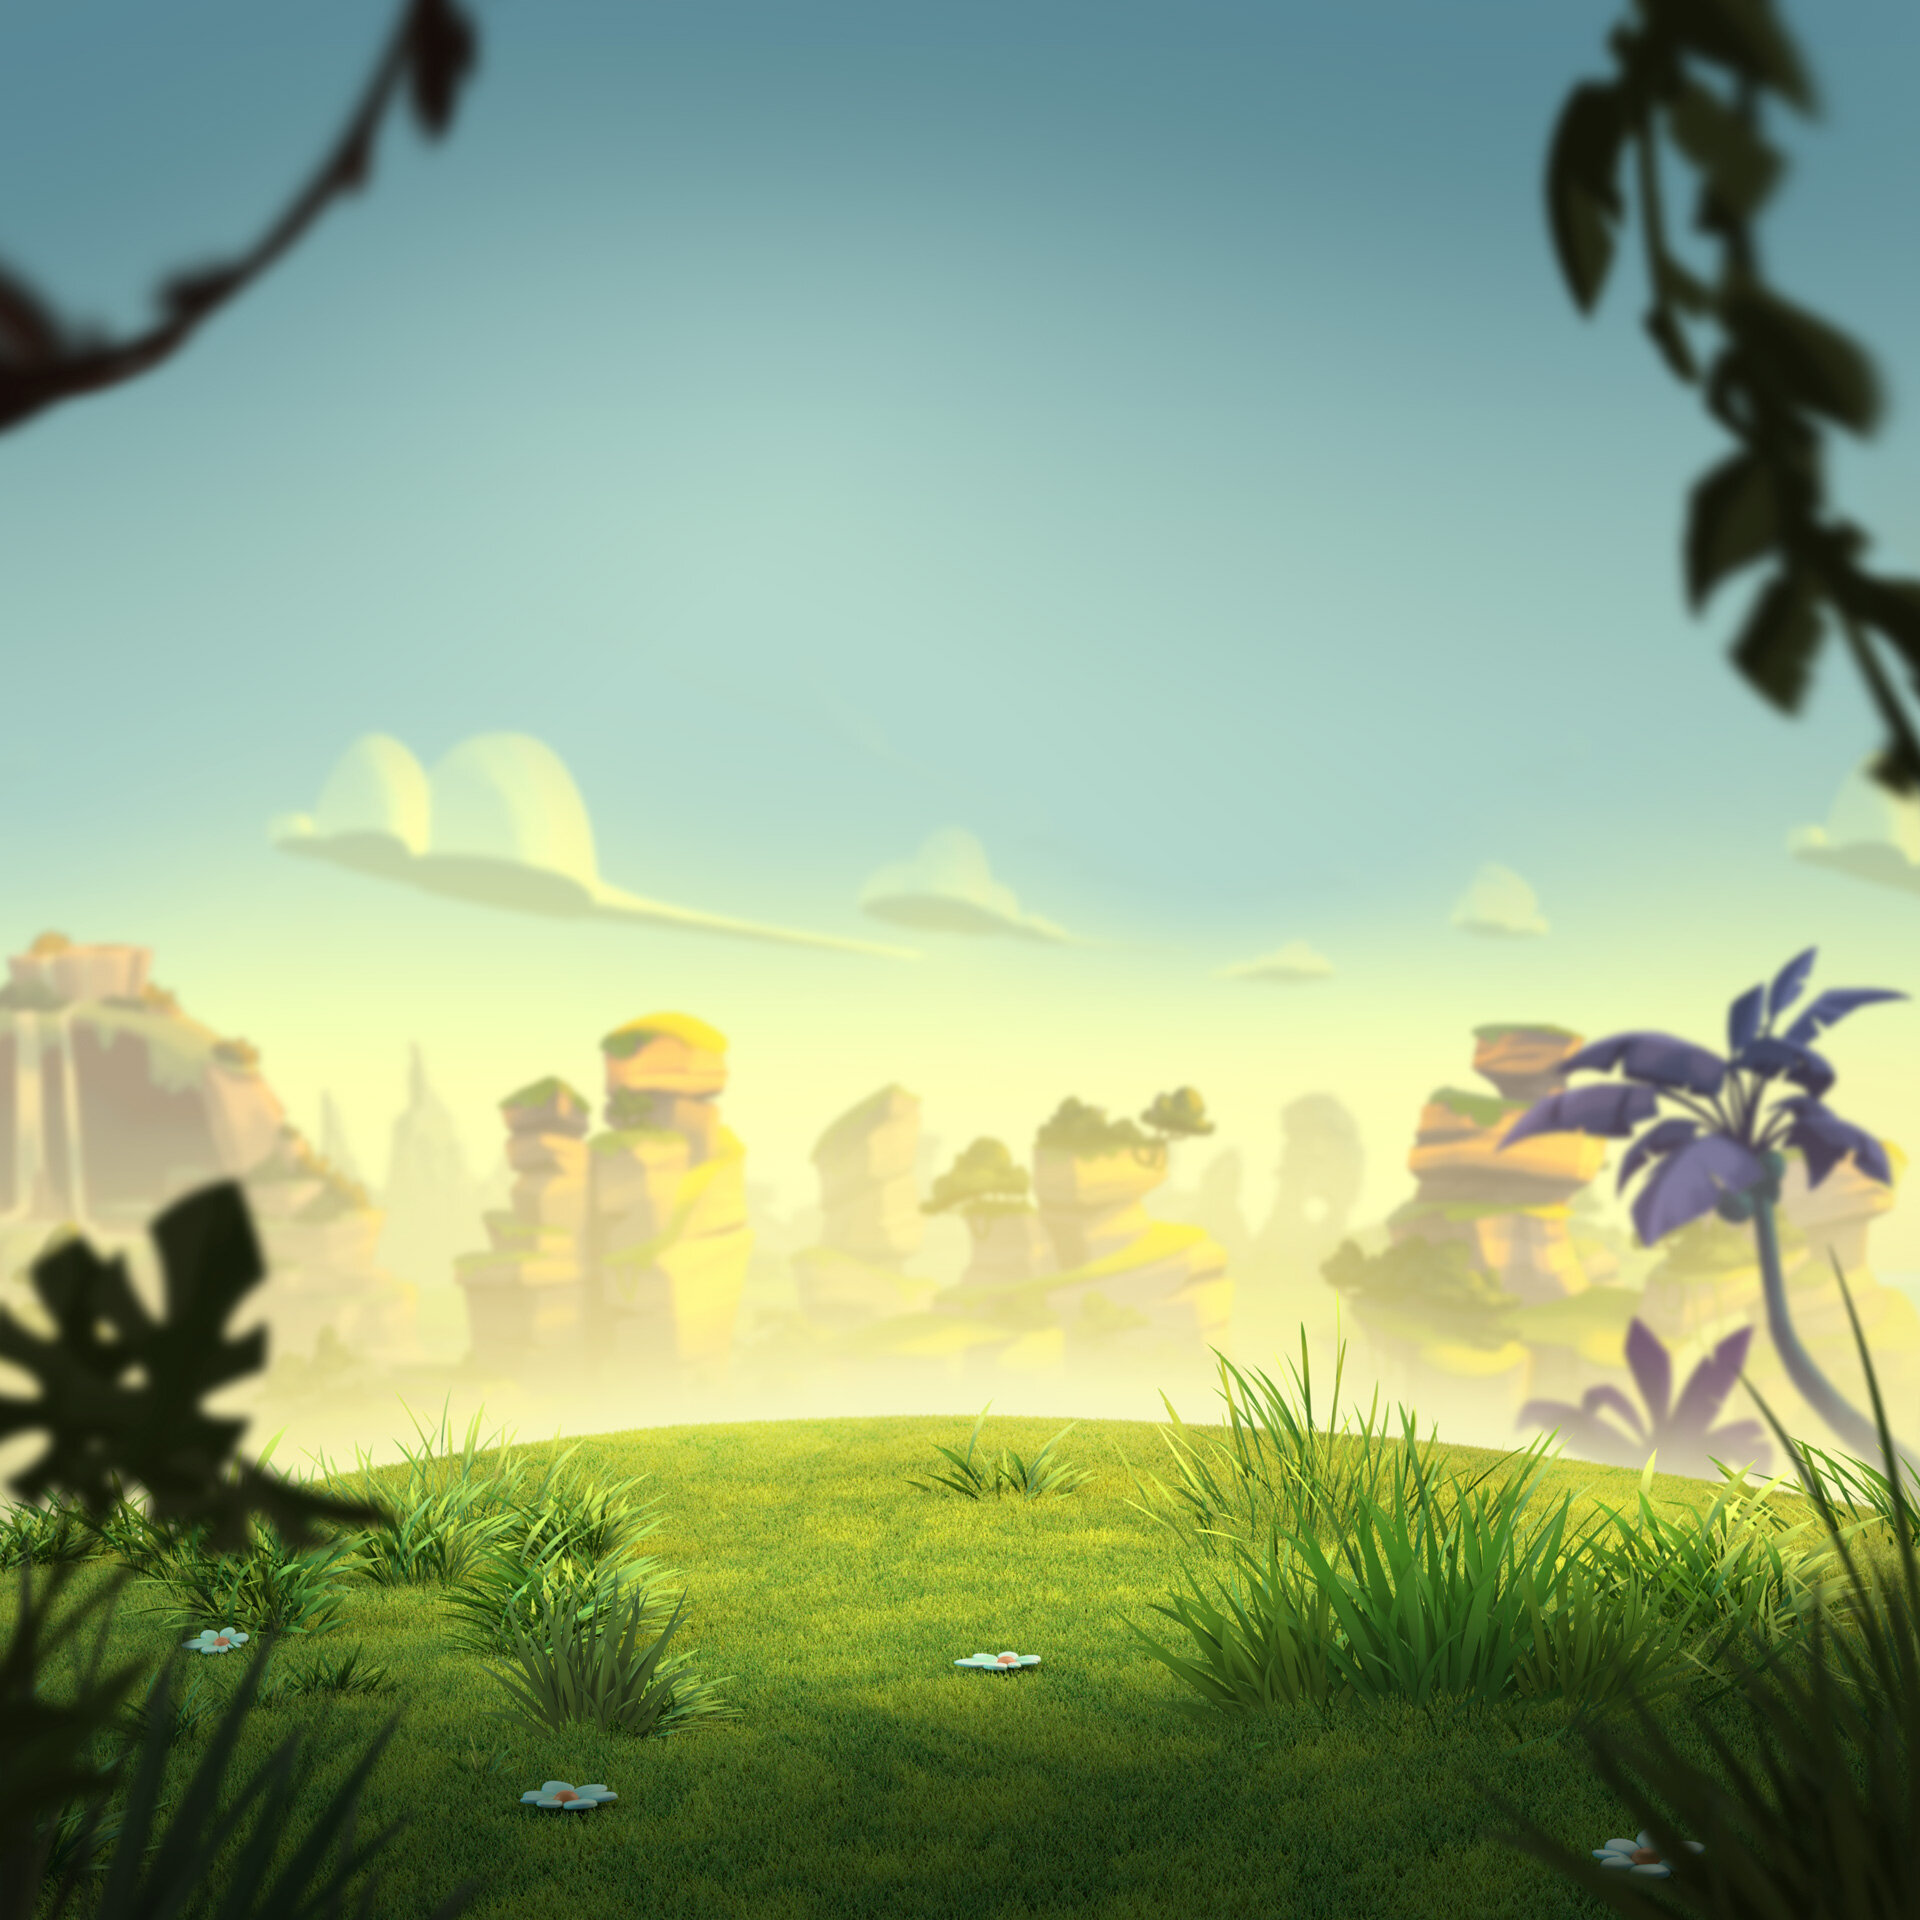 Background assets for marketing purposes, Rovio Entertainment